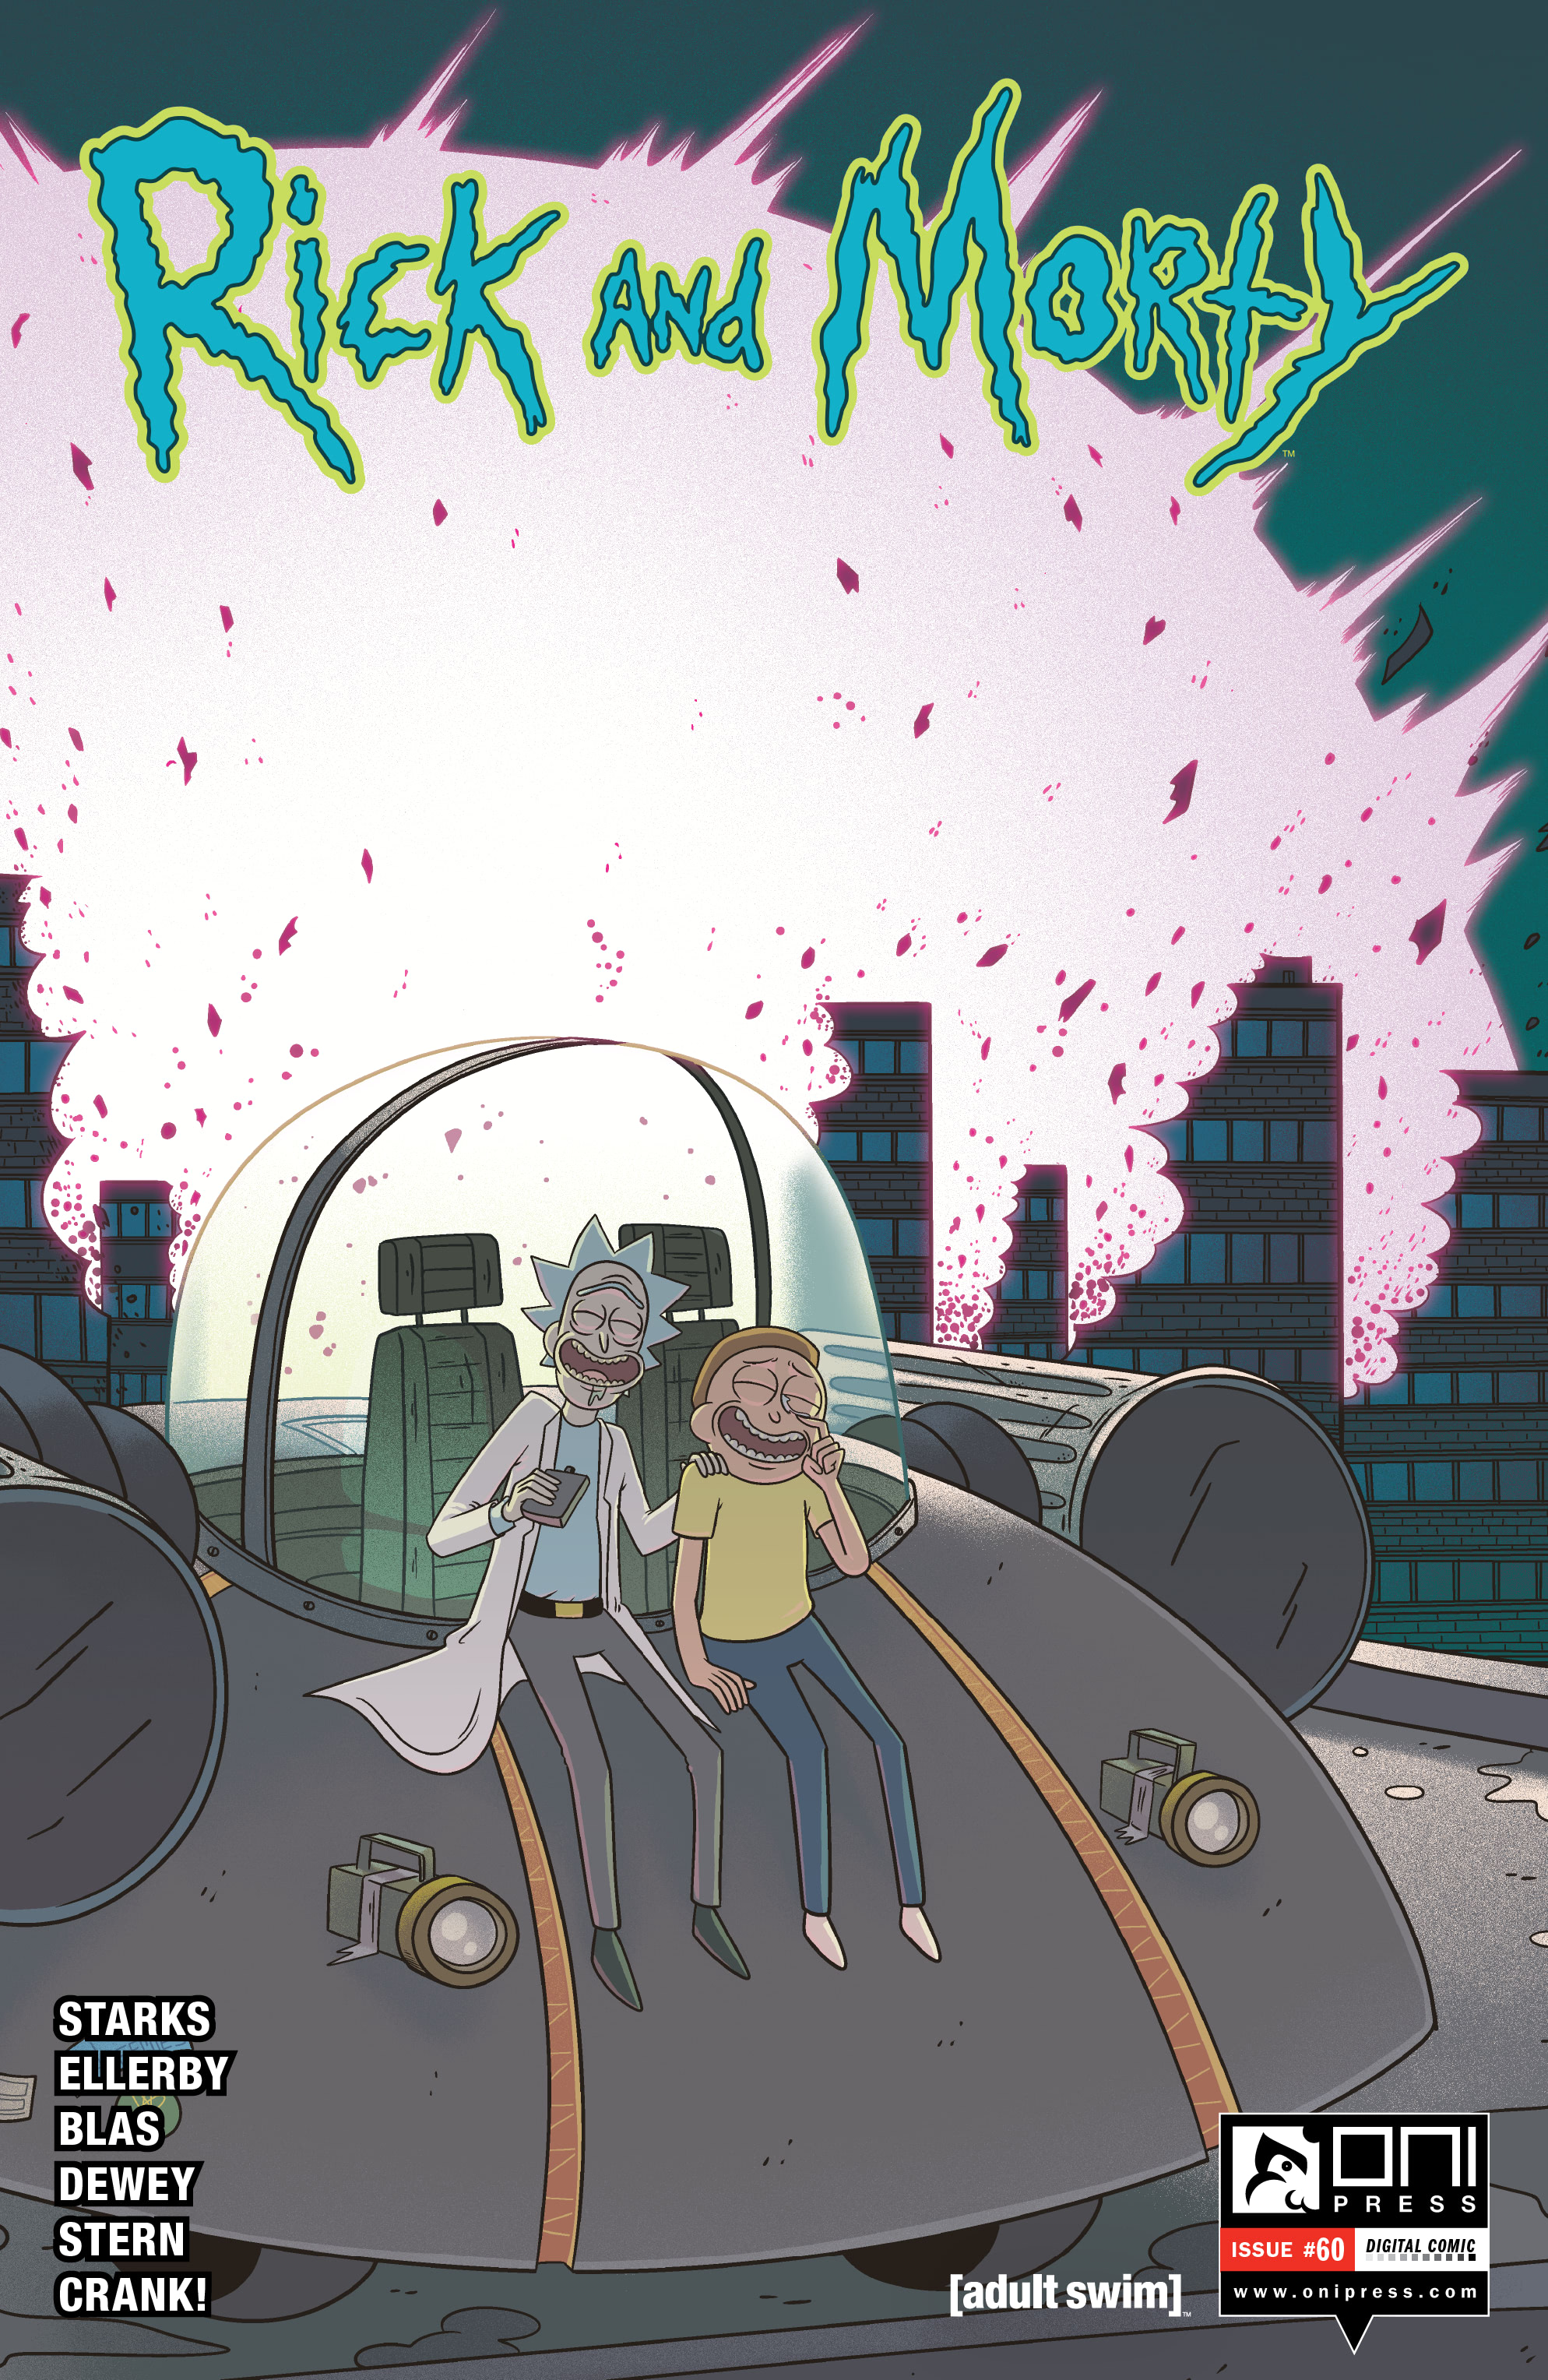 Read online Rick and Morty comic -  Issue #60 - 1